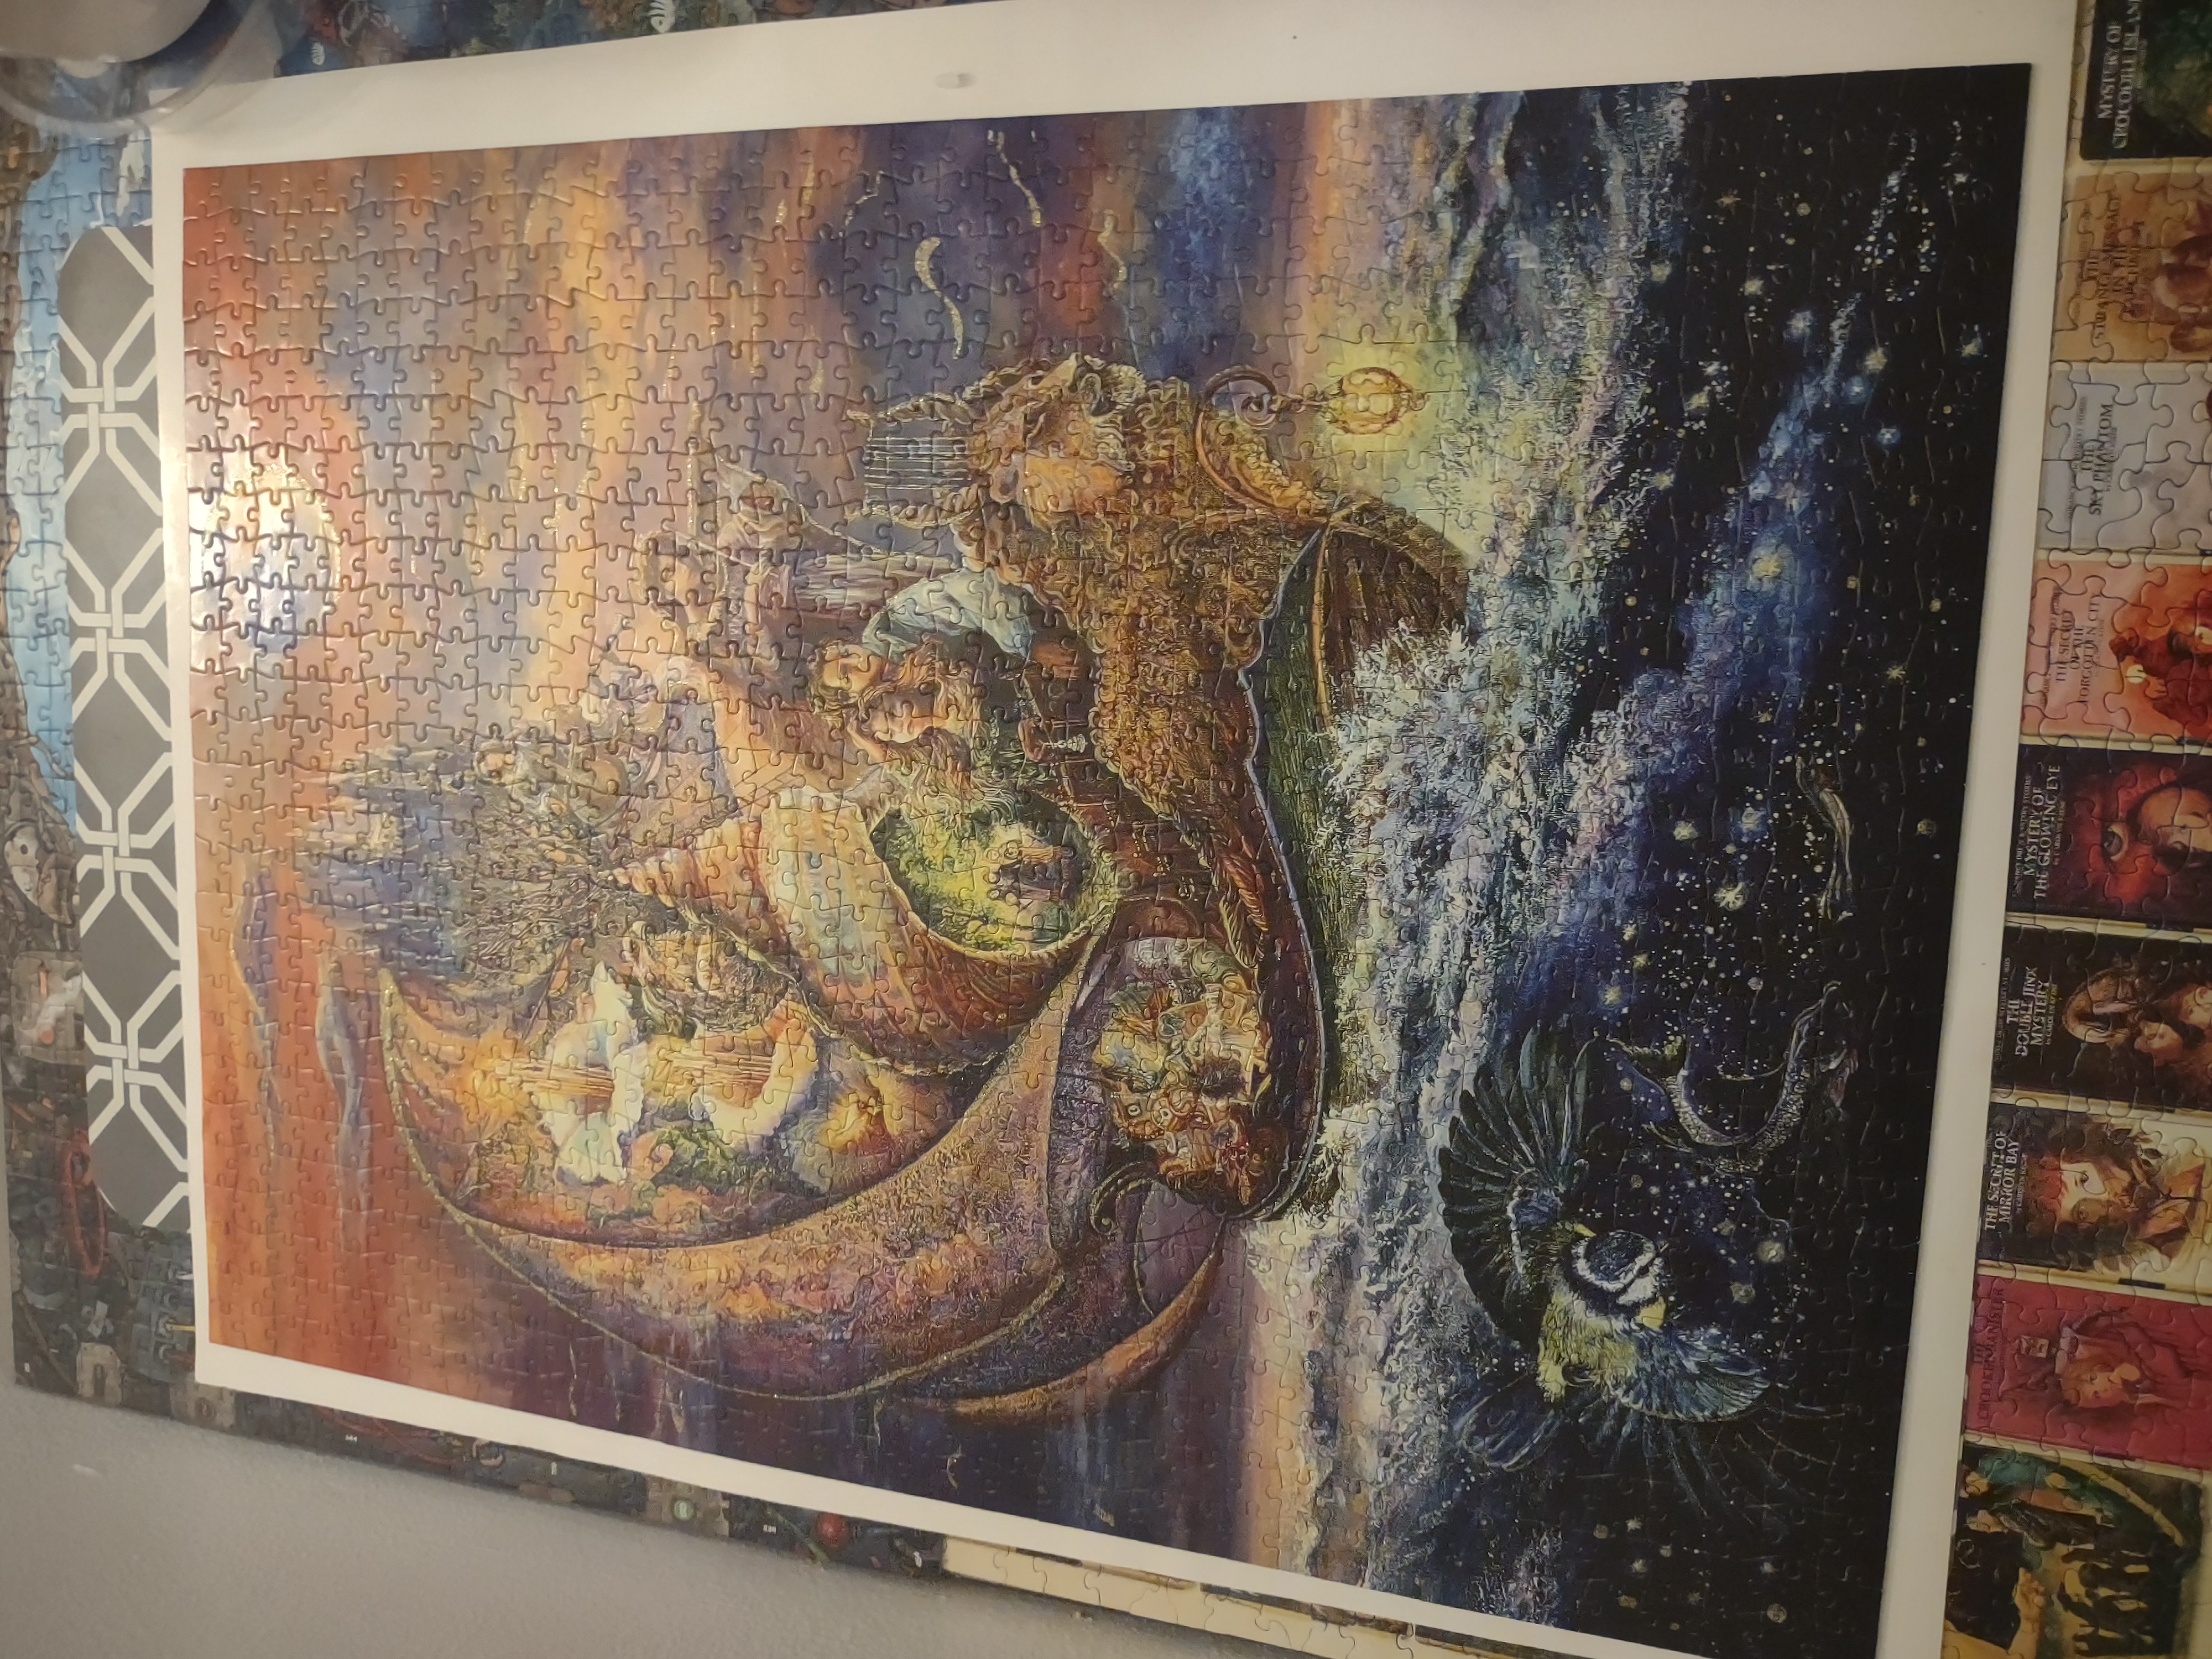 A large 1000 piece puzzle I did that is glittery.